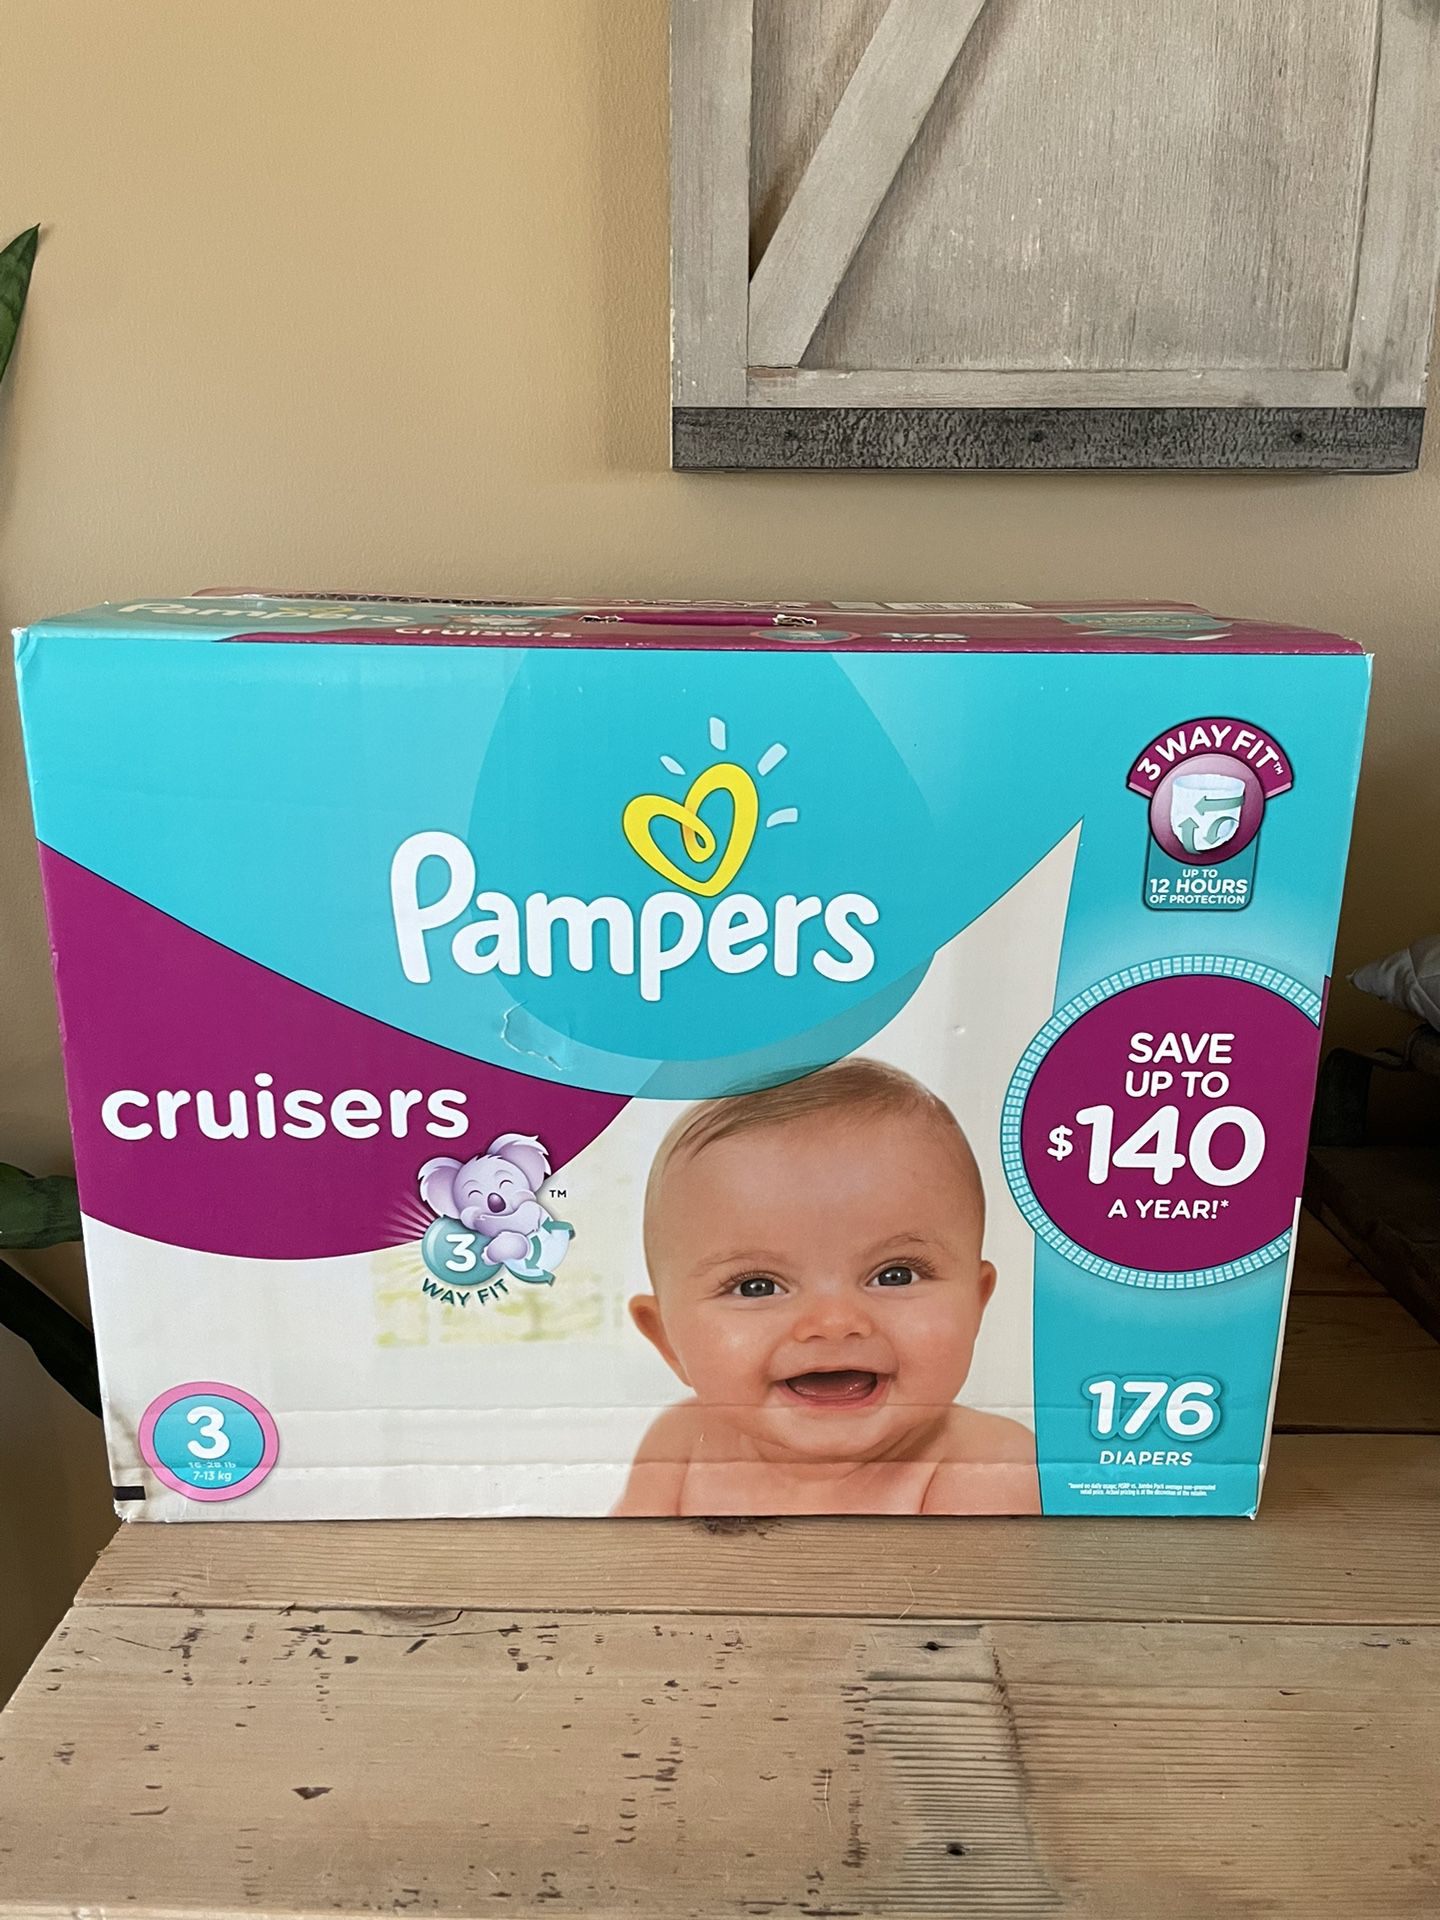 Pampers Cruisers Diapers Size 3